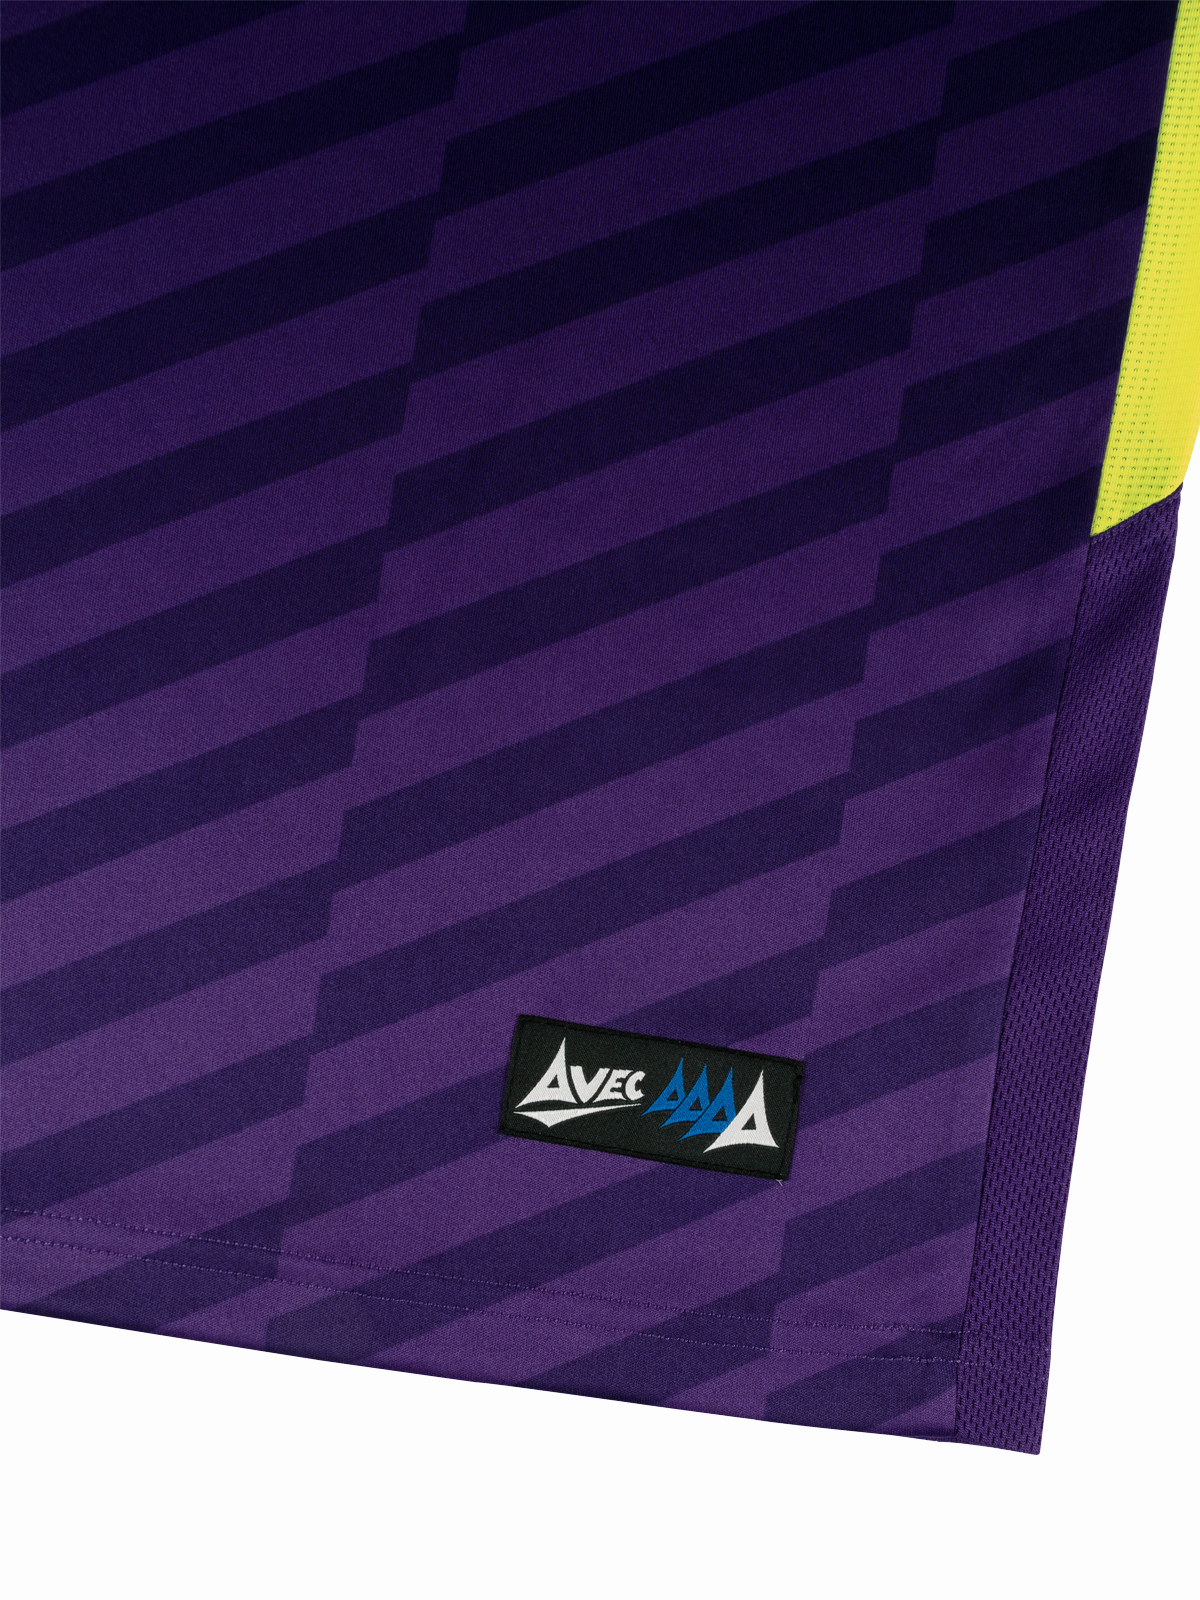 picture of evolve pro 3 jersey - purple